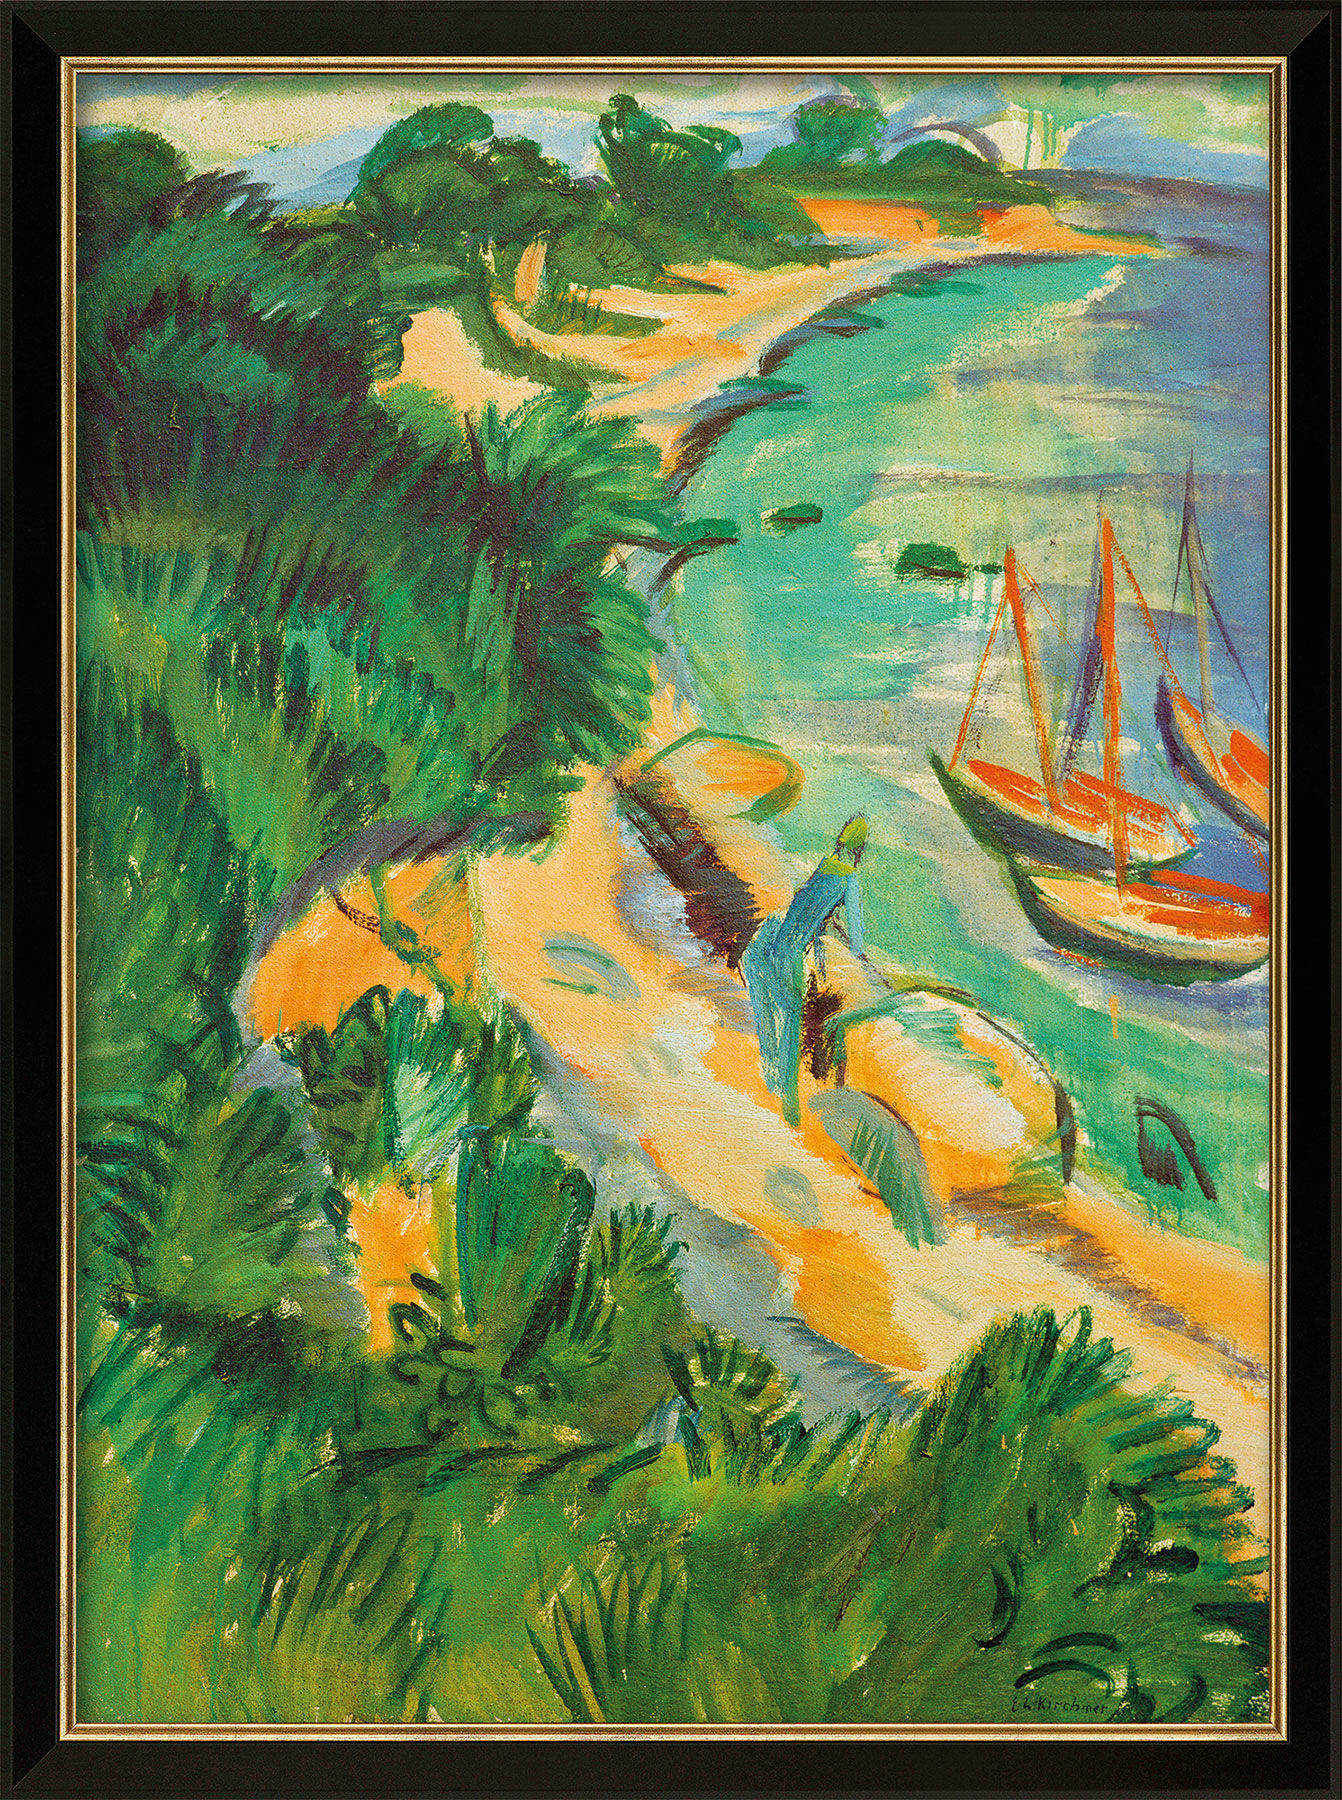 Picture "Fehmarn Bay with Boats" (1913), framed by Ernst Ludwig Kirchner